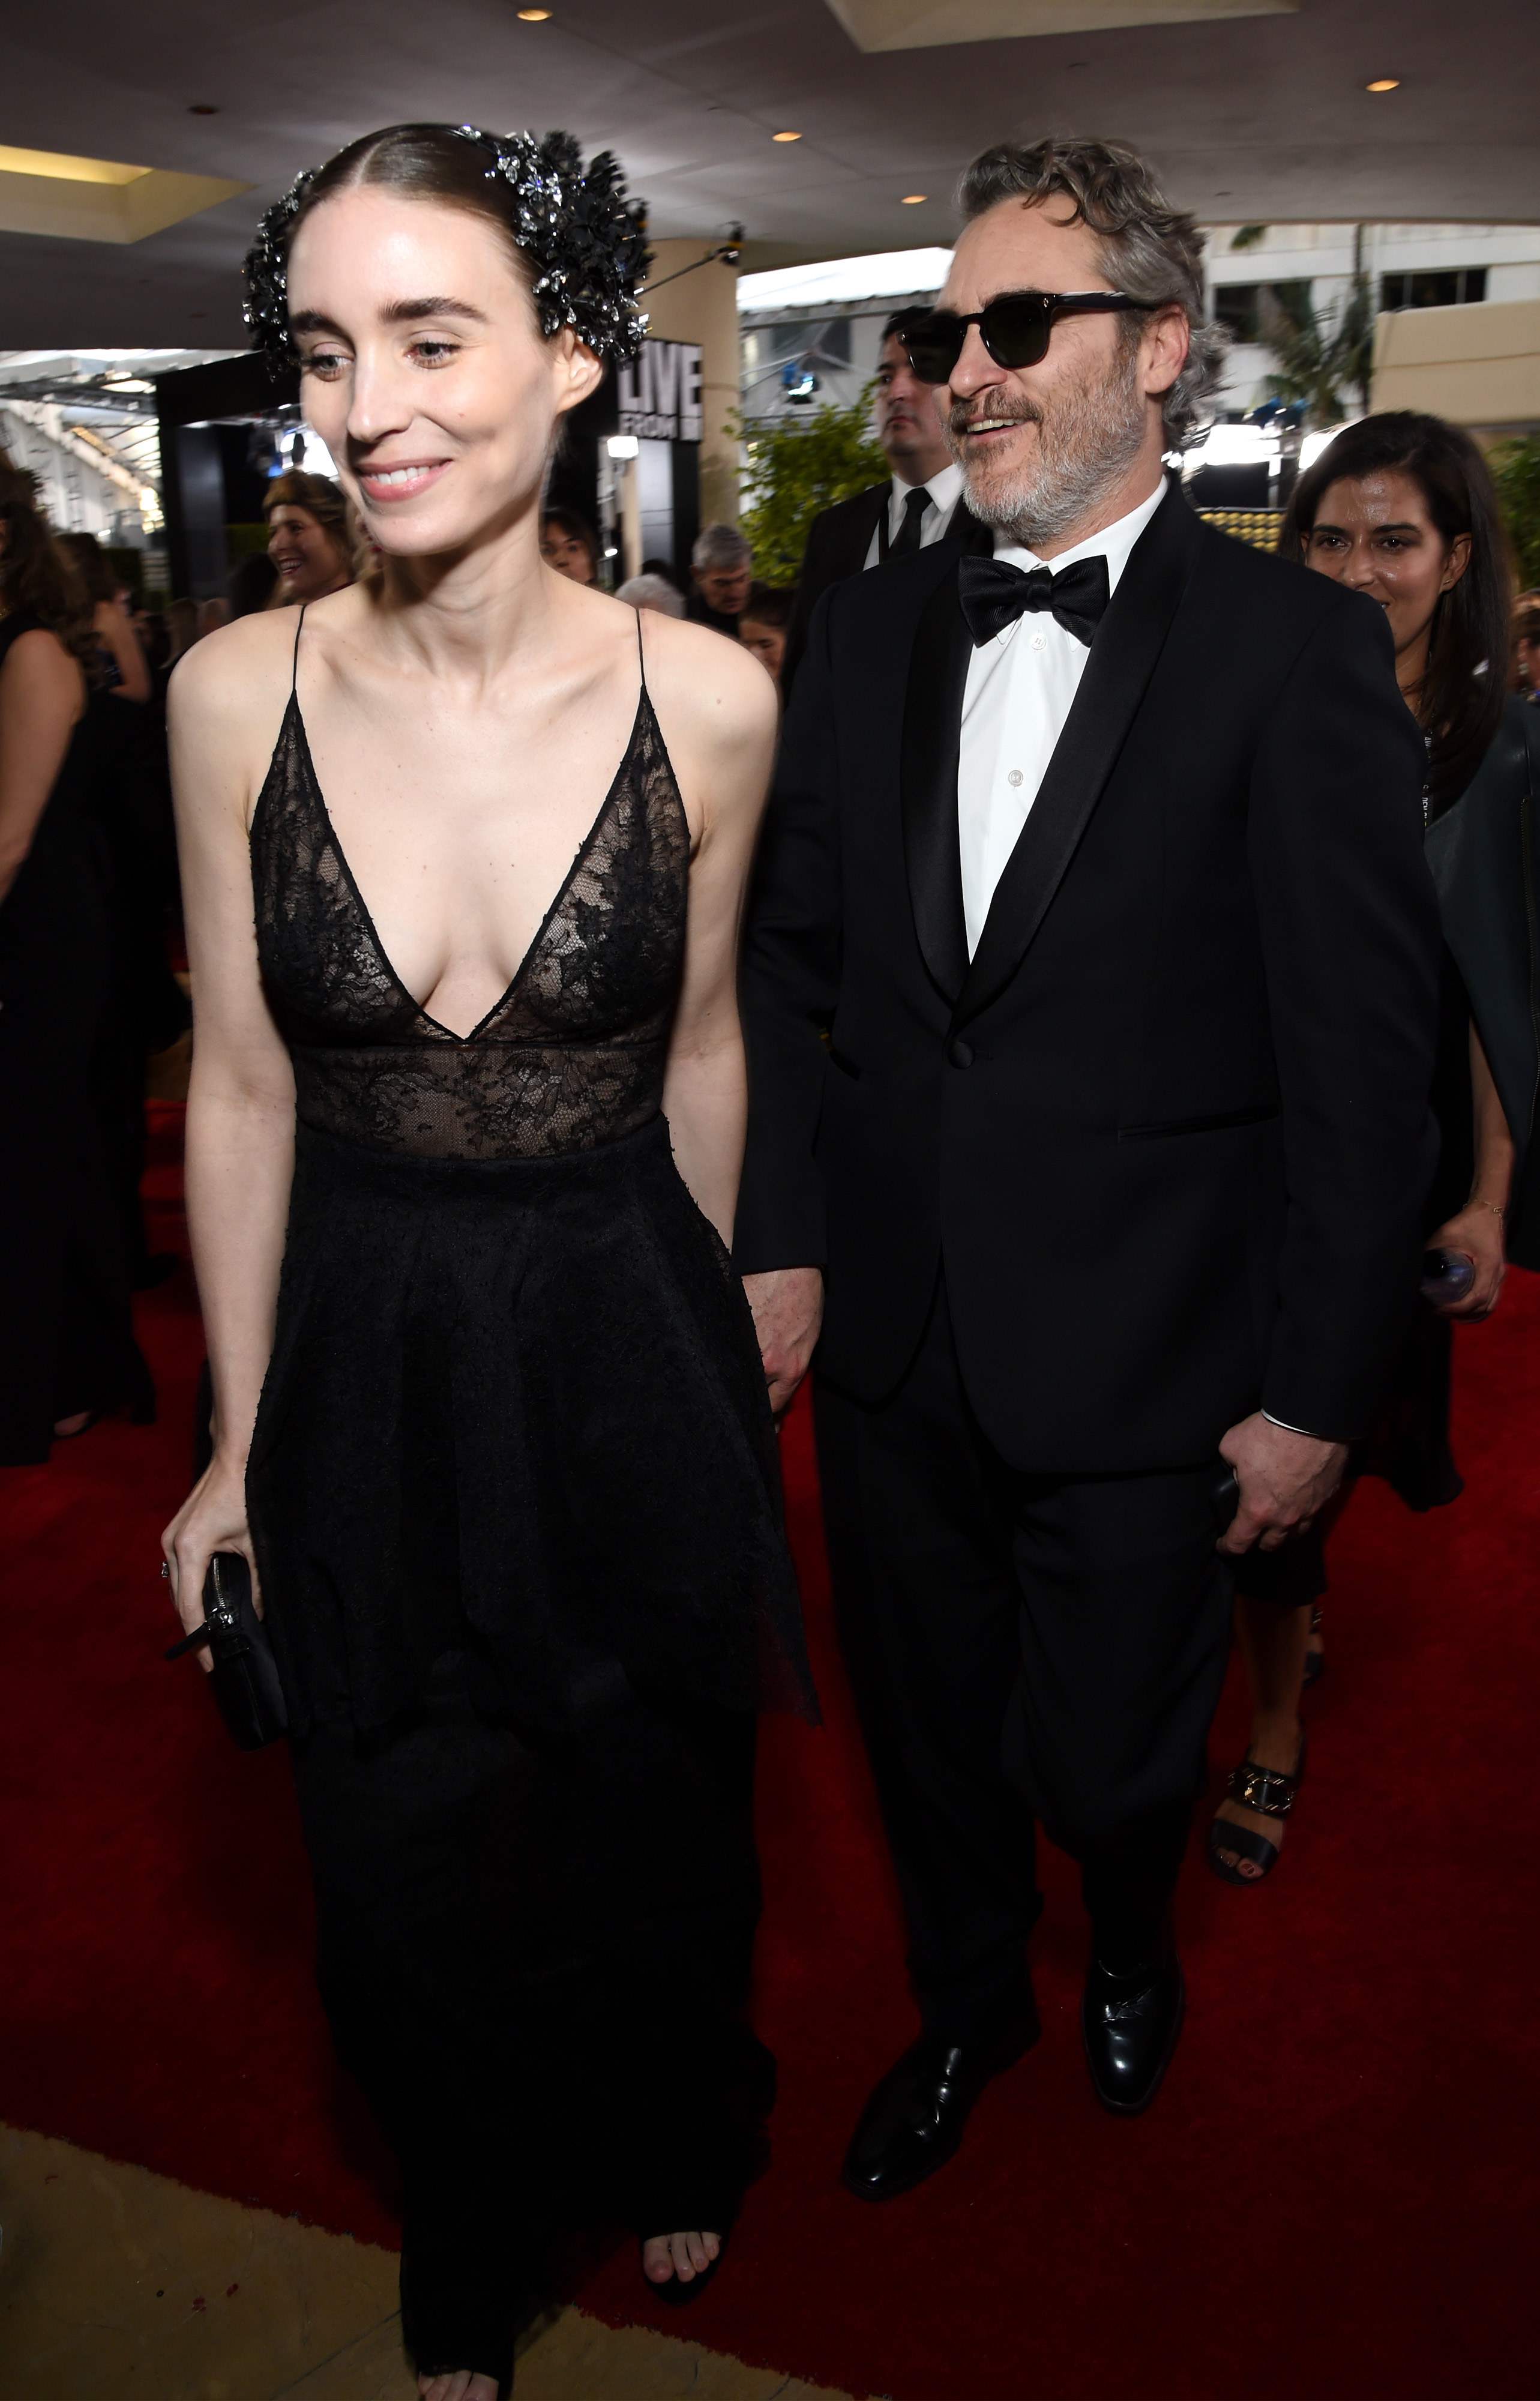 Mara and Phoenix on the red carpet at the Golden Globes in 2020